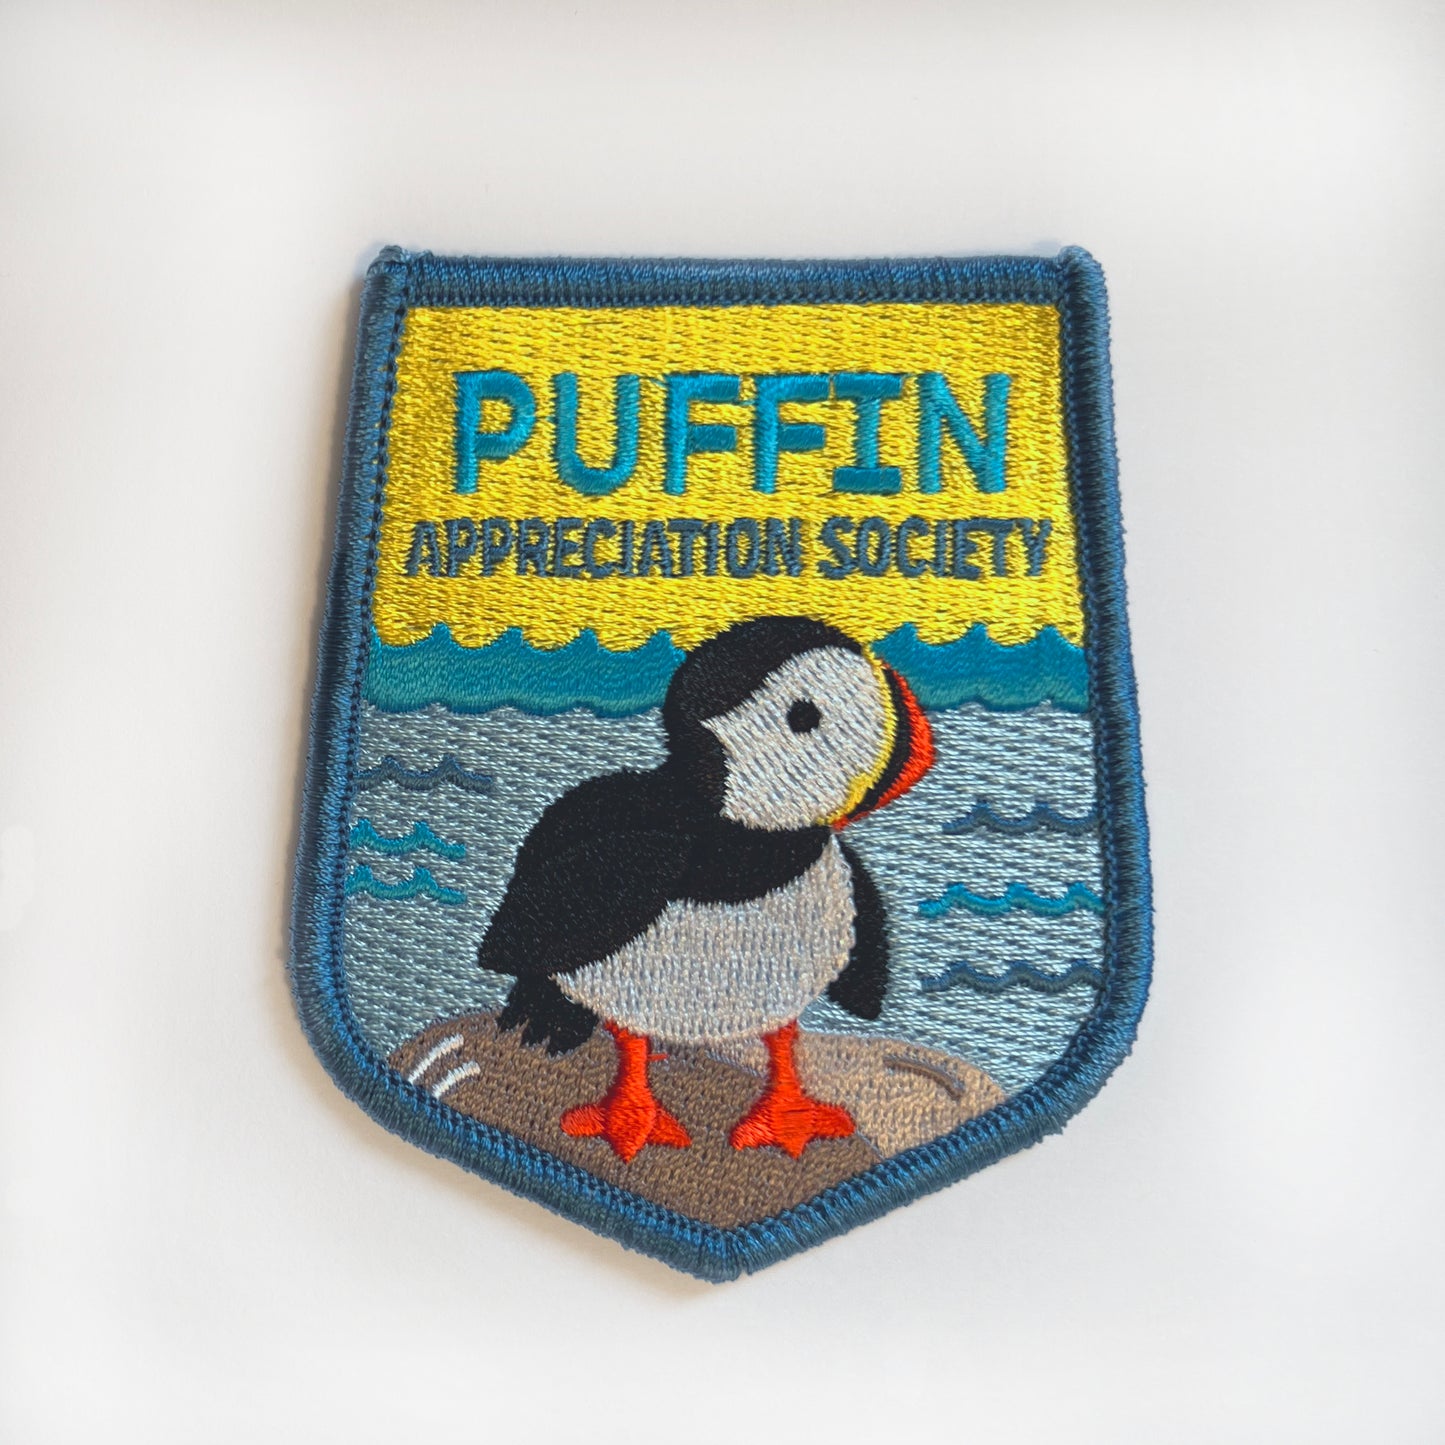 Puffin Appreciation Society iron-on patch